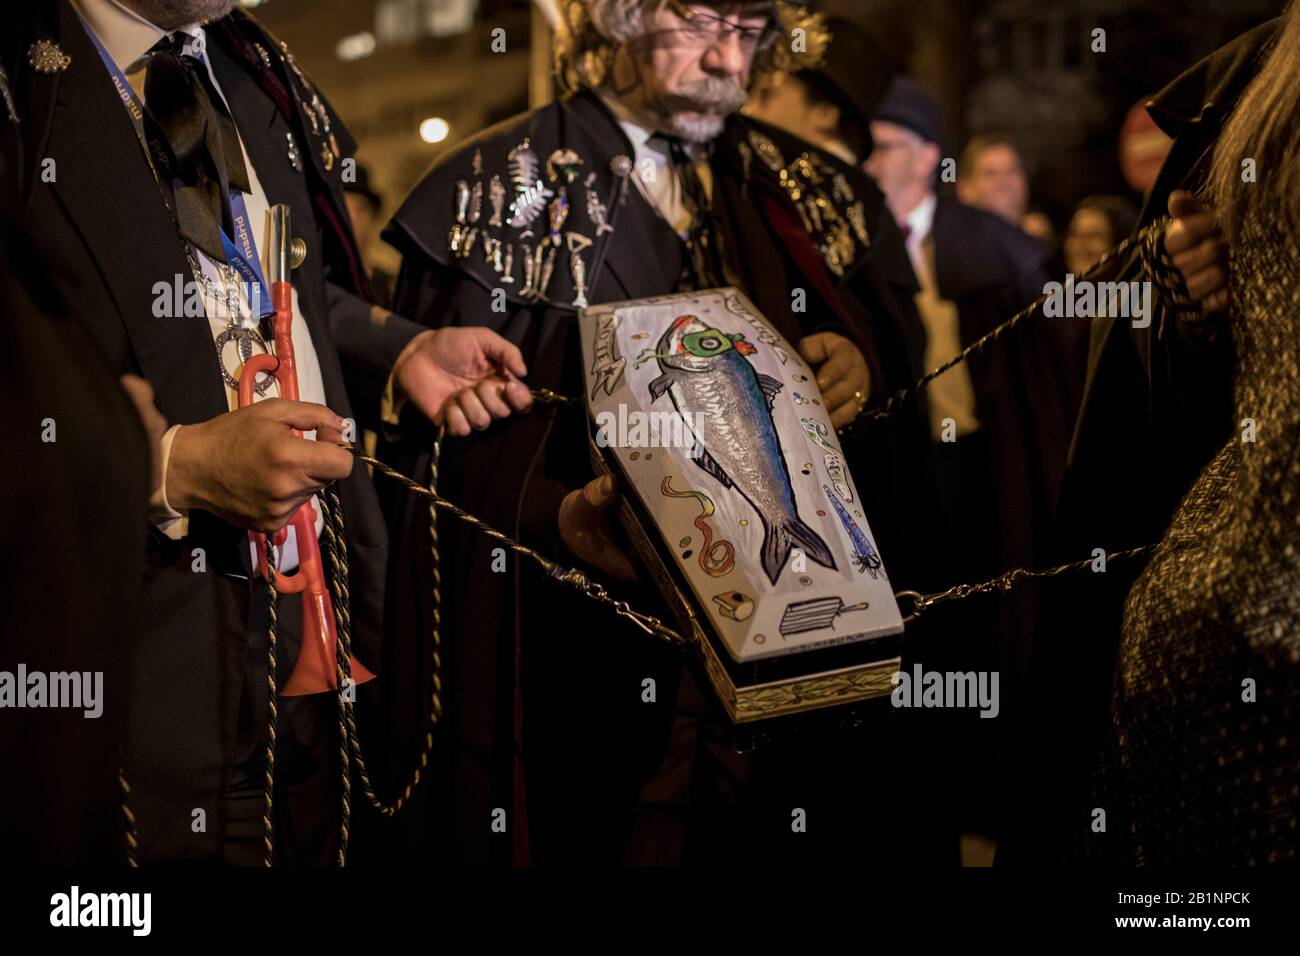 Coffin of the Sardine carried by the members of the brotherhood of the sardine during the procession. The Sardine procession which takes place in Madrid, is a centuries-old Spanish tradition made famous by a painting of the Spanish artist Francisco de Goya called ‘The Burial of the Sardine'. It mark the end of Carnival celebrations and the beginning of Lent 40 days before Easter. It consists of a procession that parodies a funeral in which a symbolic figure of a sardine in its coffin is burned. The festivity takes place every Ash Wednesday and symbolizes the burial of the past and the rebirt Stock Photo